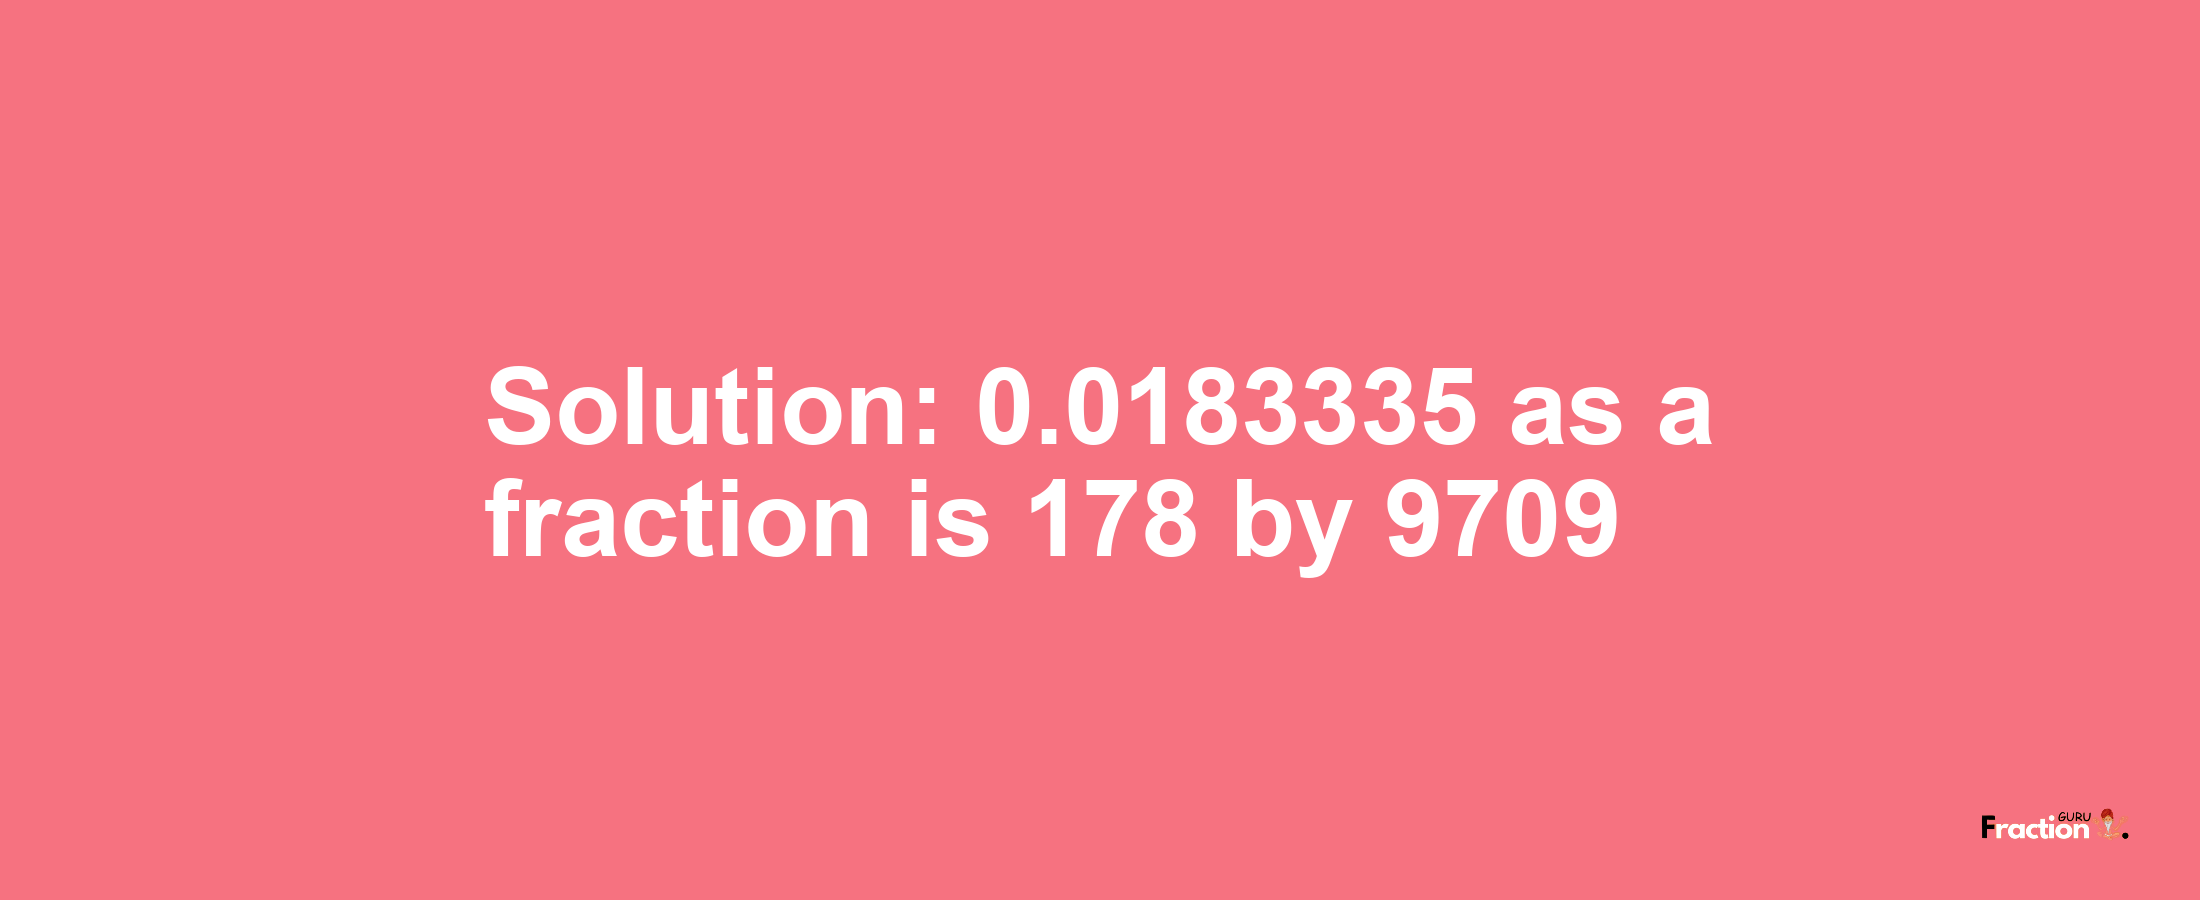 Solution:0.0183335 as a fraction is 178/9709